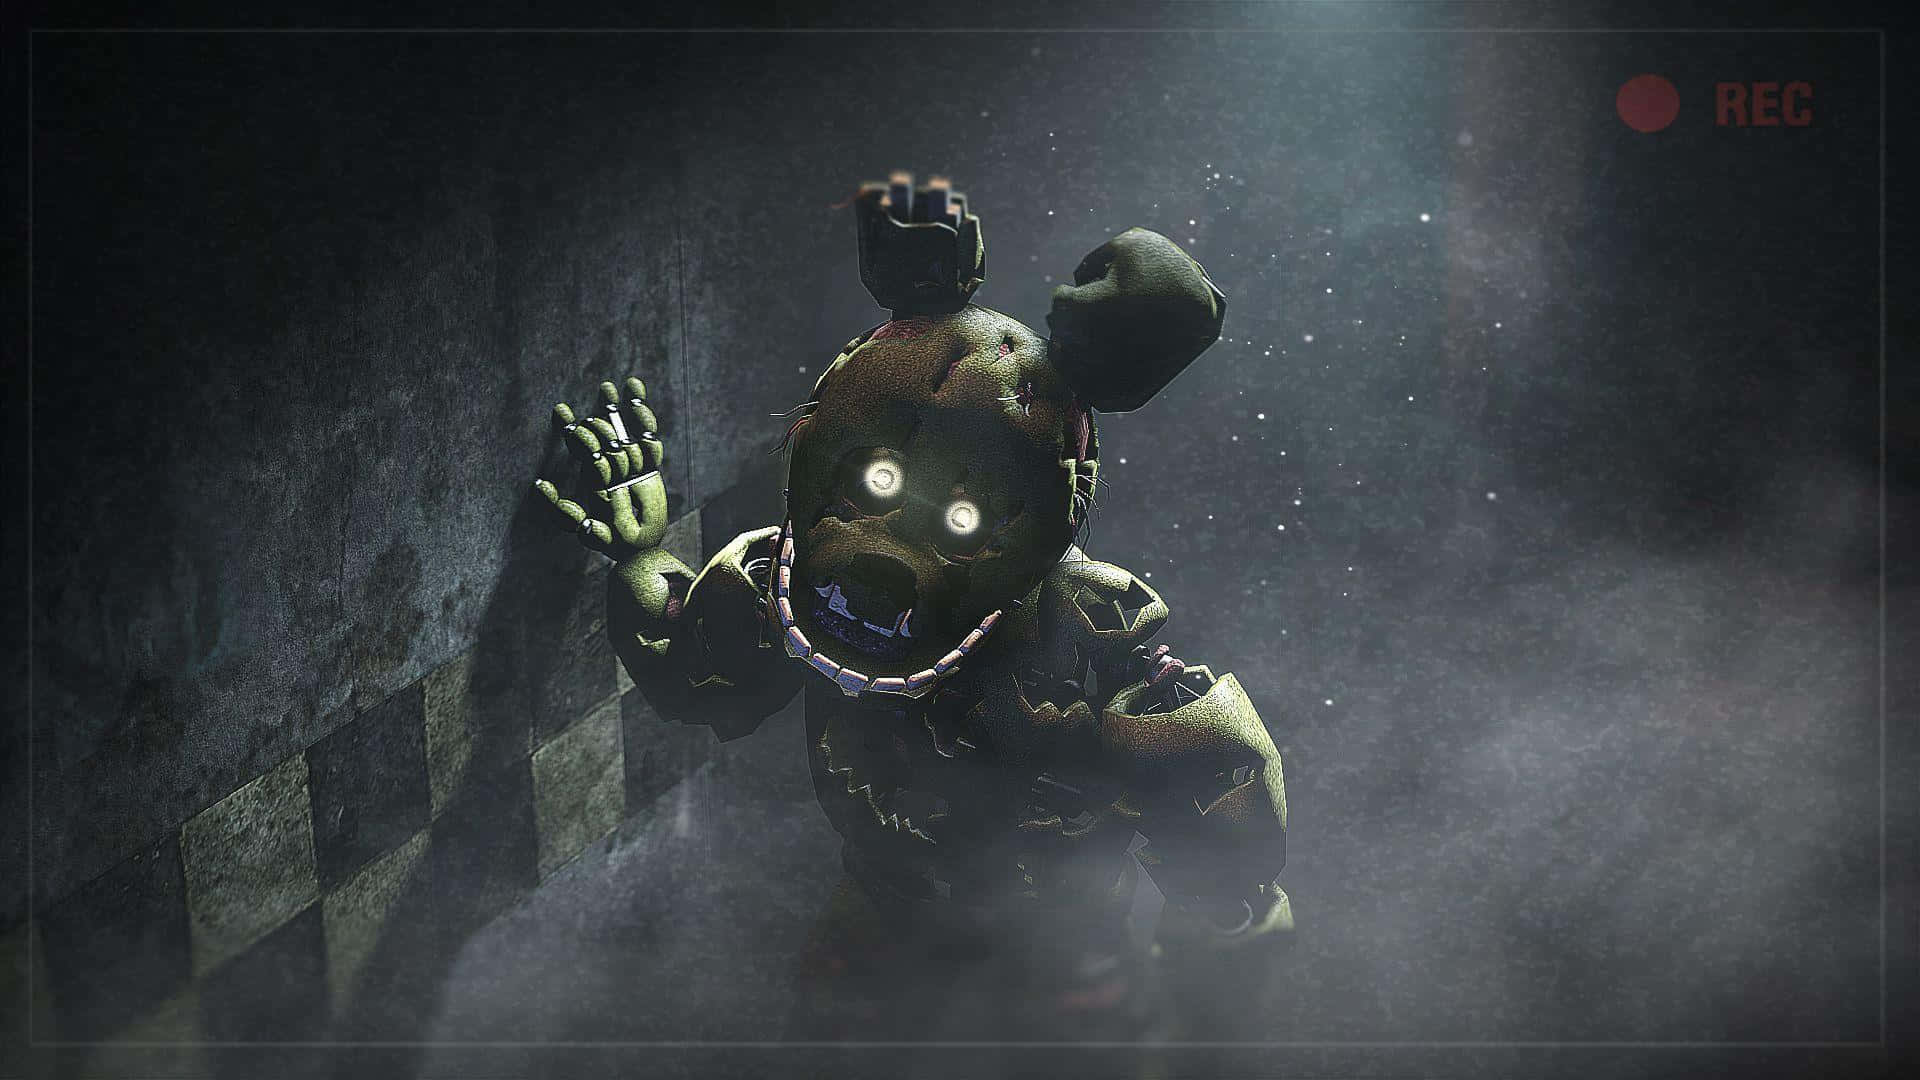 Frightening Springtrap up close - The ultimate Five Nights at Freddy's antagonist Wallpaper